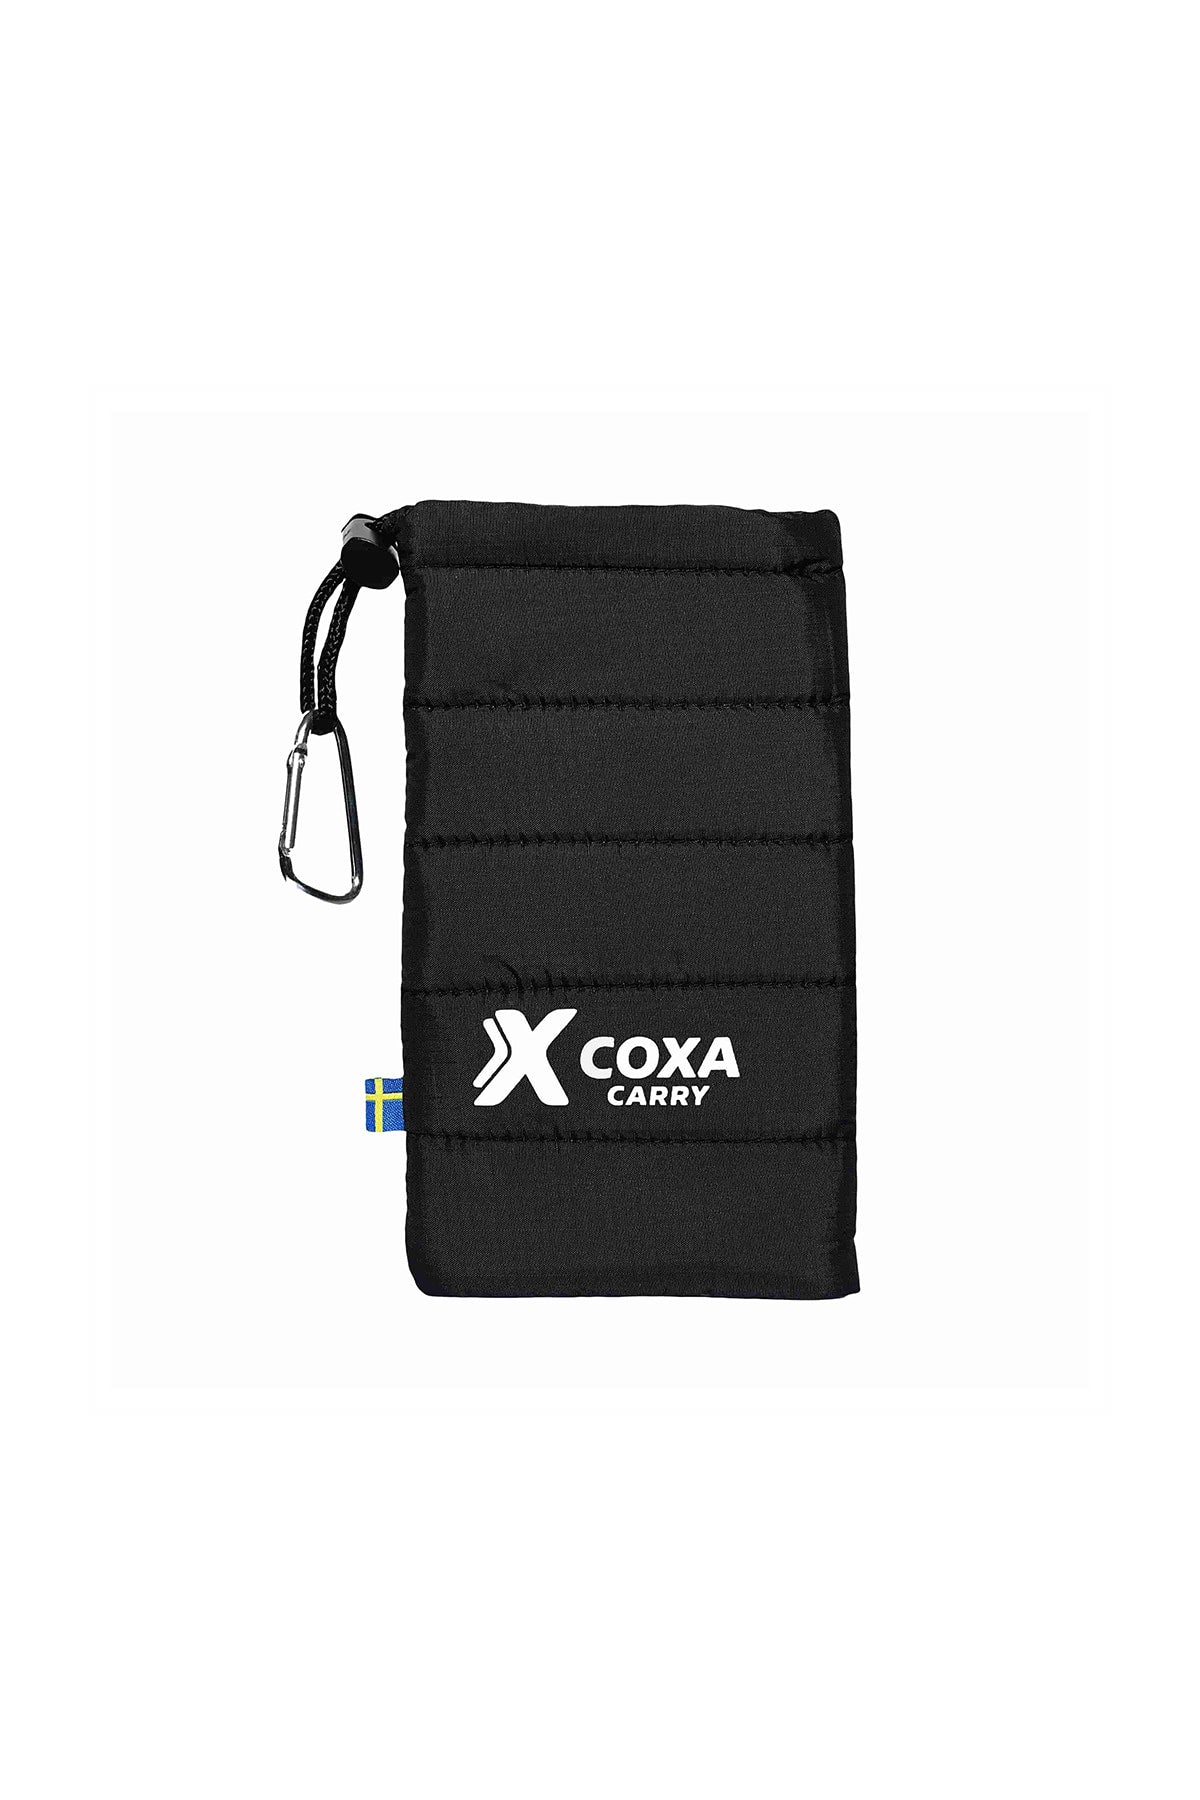 COXACarry Thermo Case